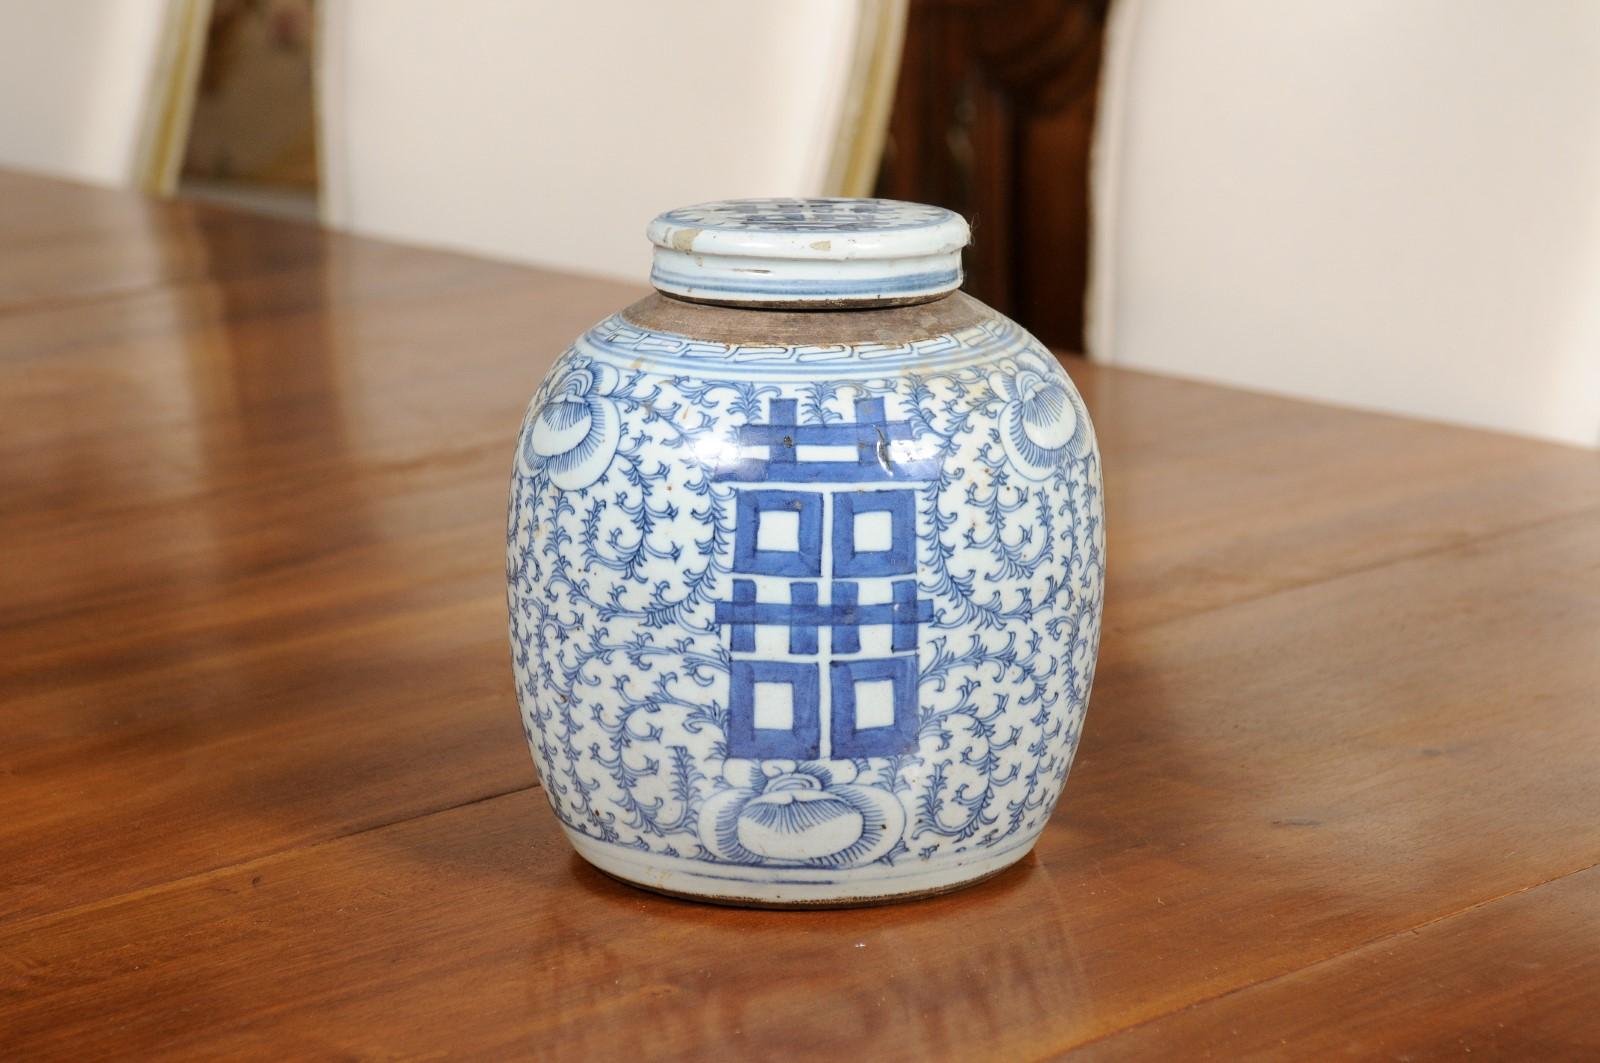 A Chinese Export blue and white Double Happiness lidded jar from the early 20th century, with scrolling foliage. Created in China during the early years of the 20th century, this porcelain jar features the Double Happiness motif standing out